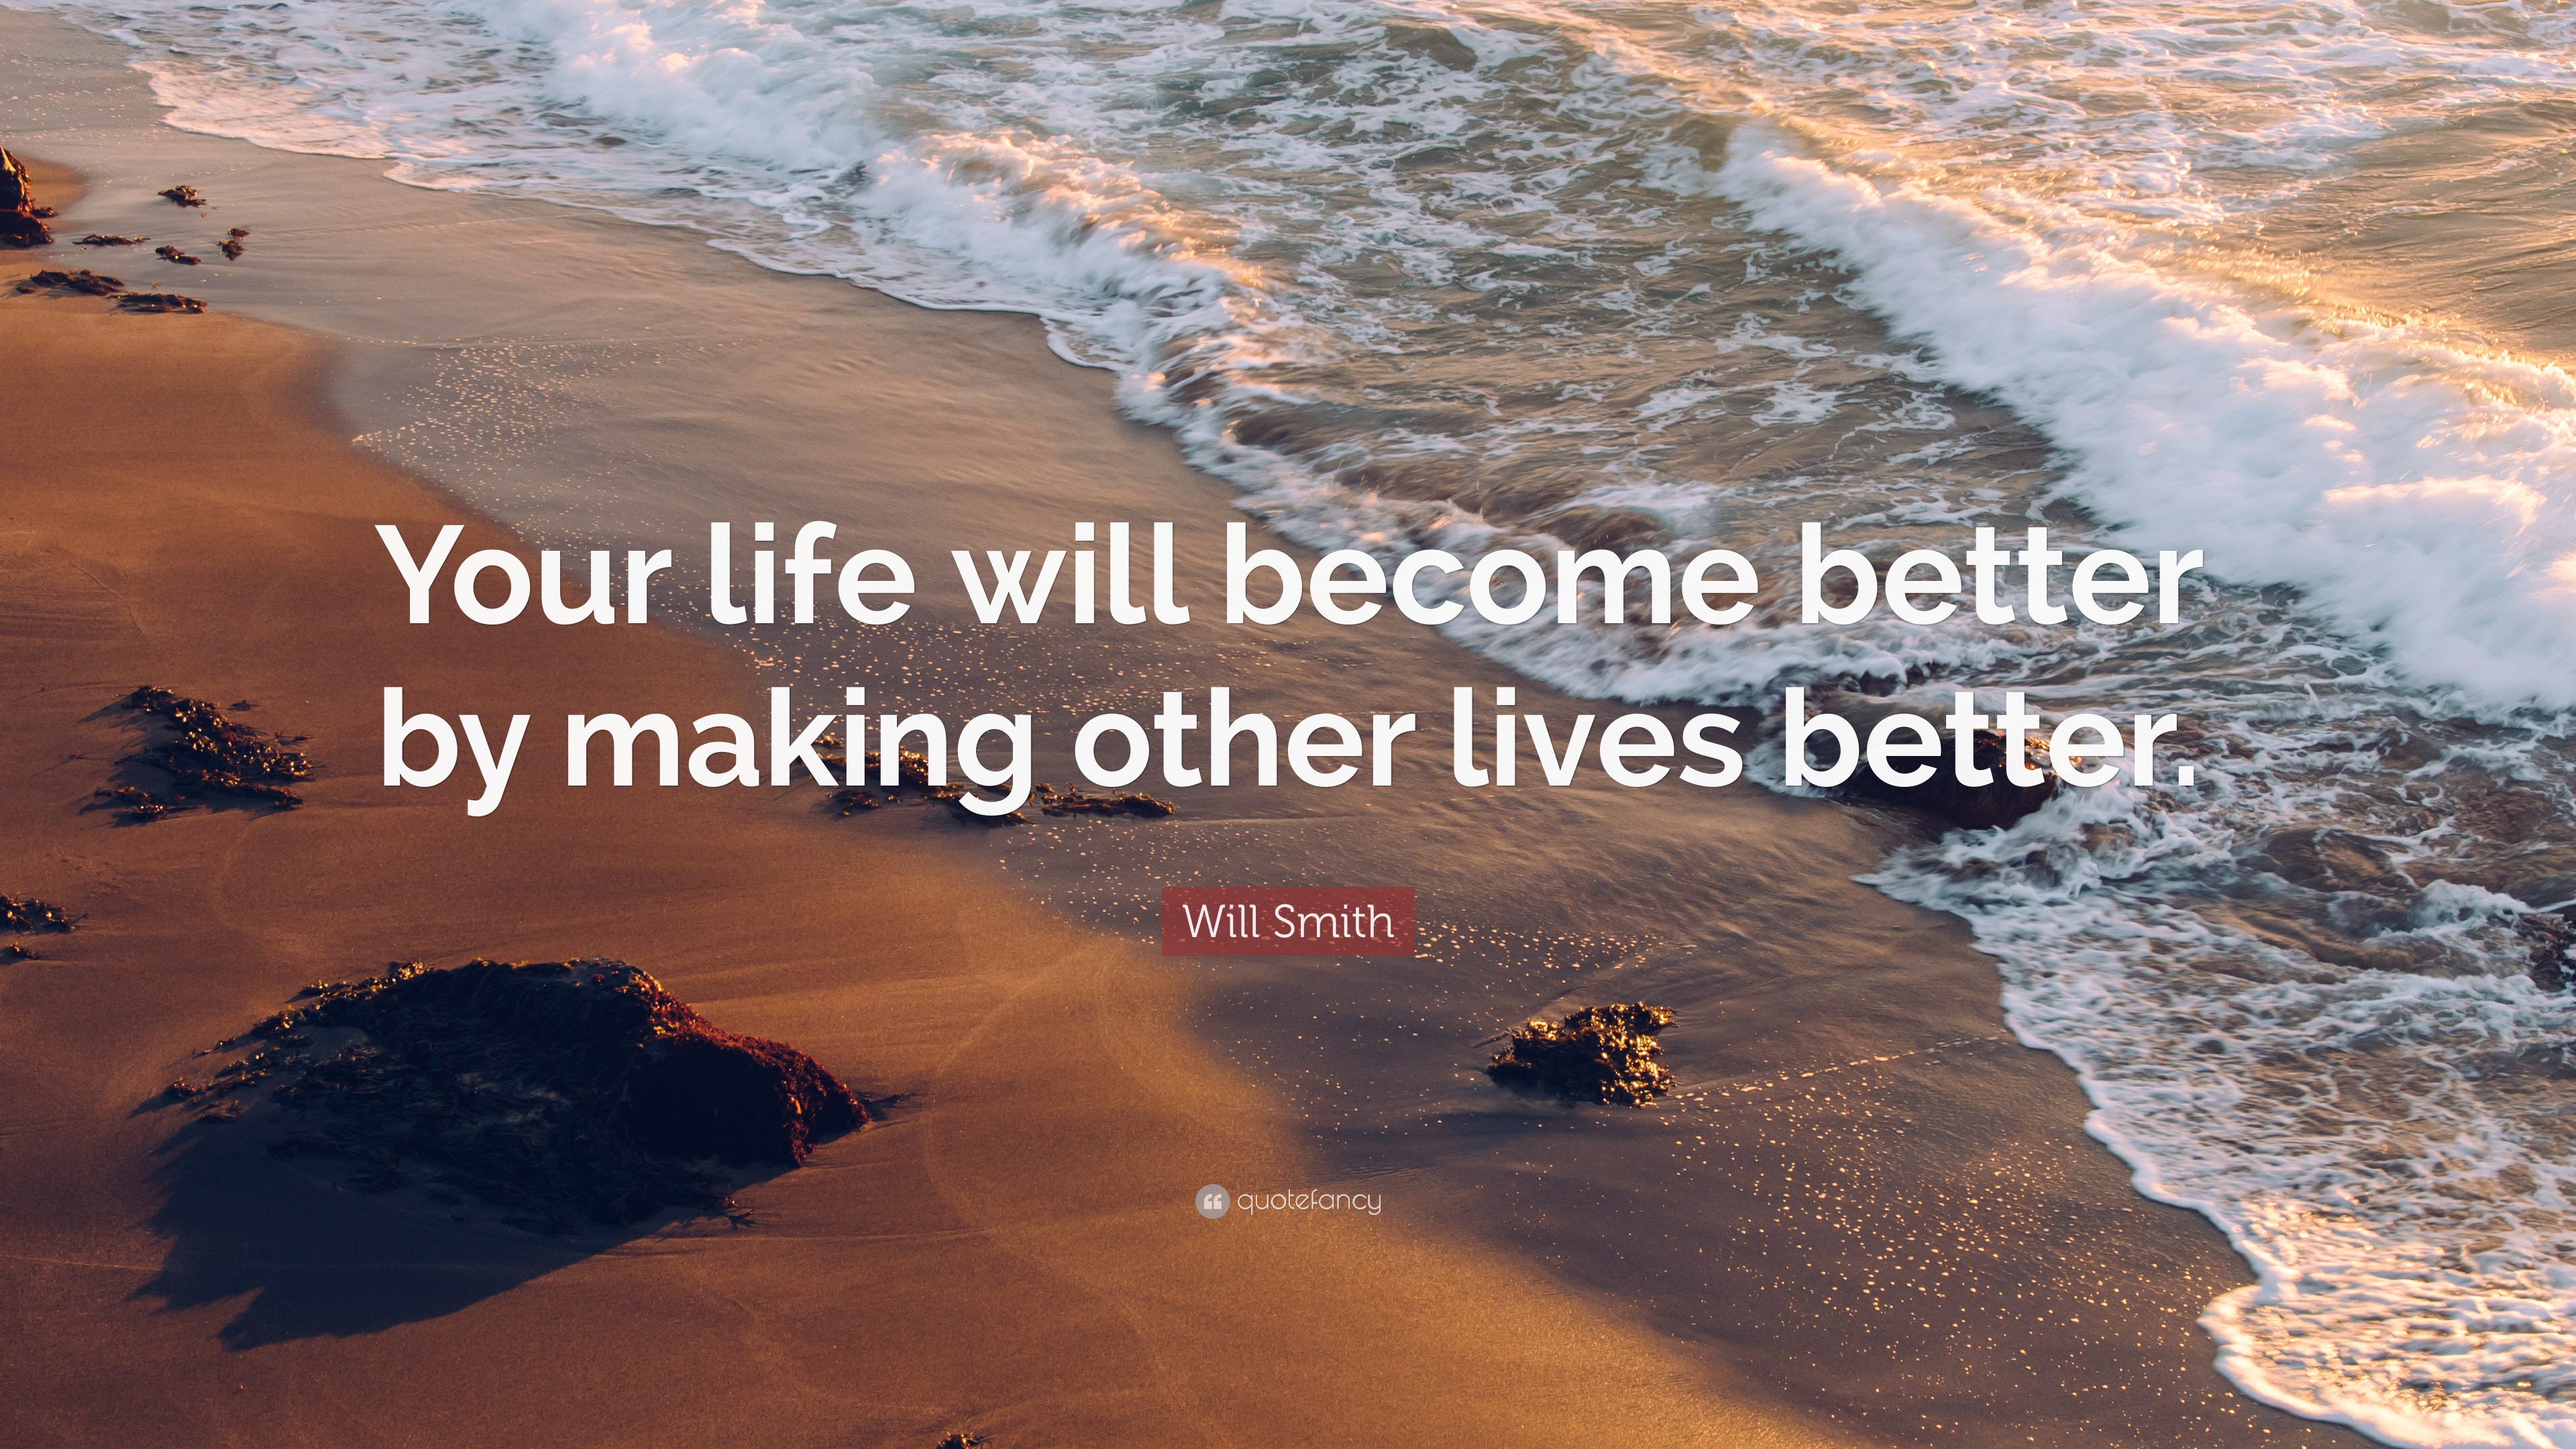 Will Smith Quote: “Your life will become better by making other lives